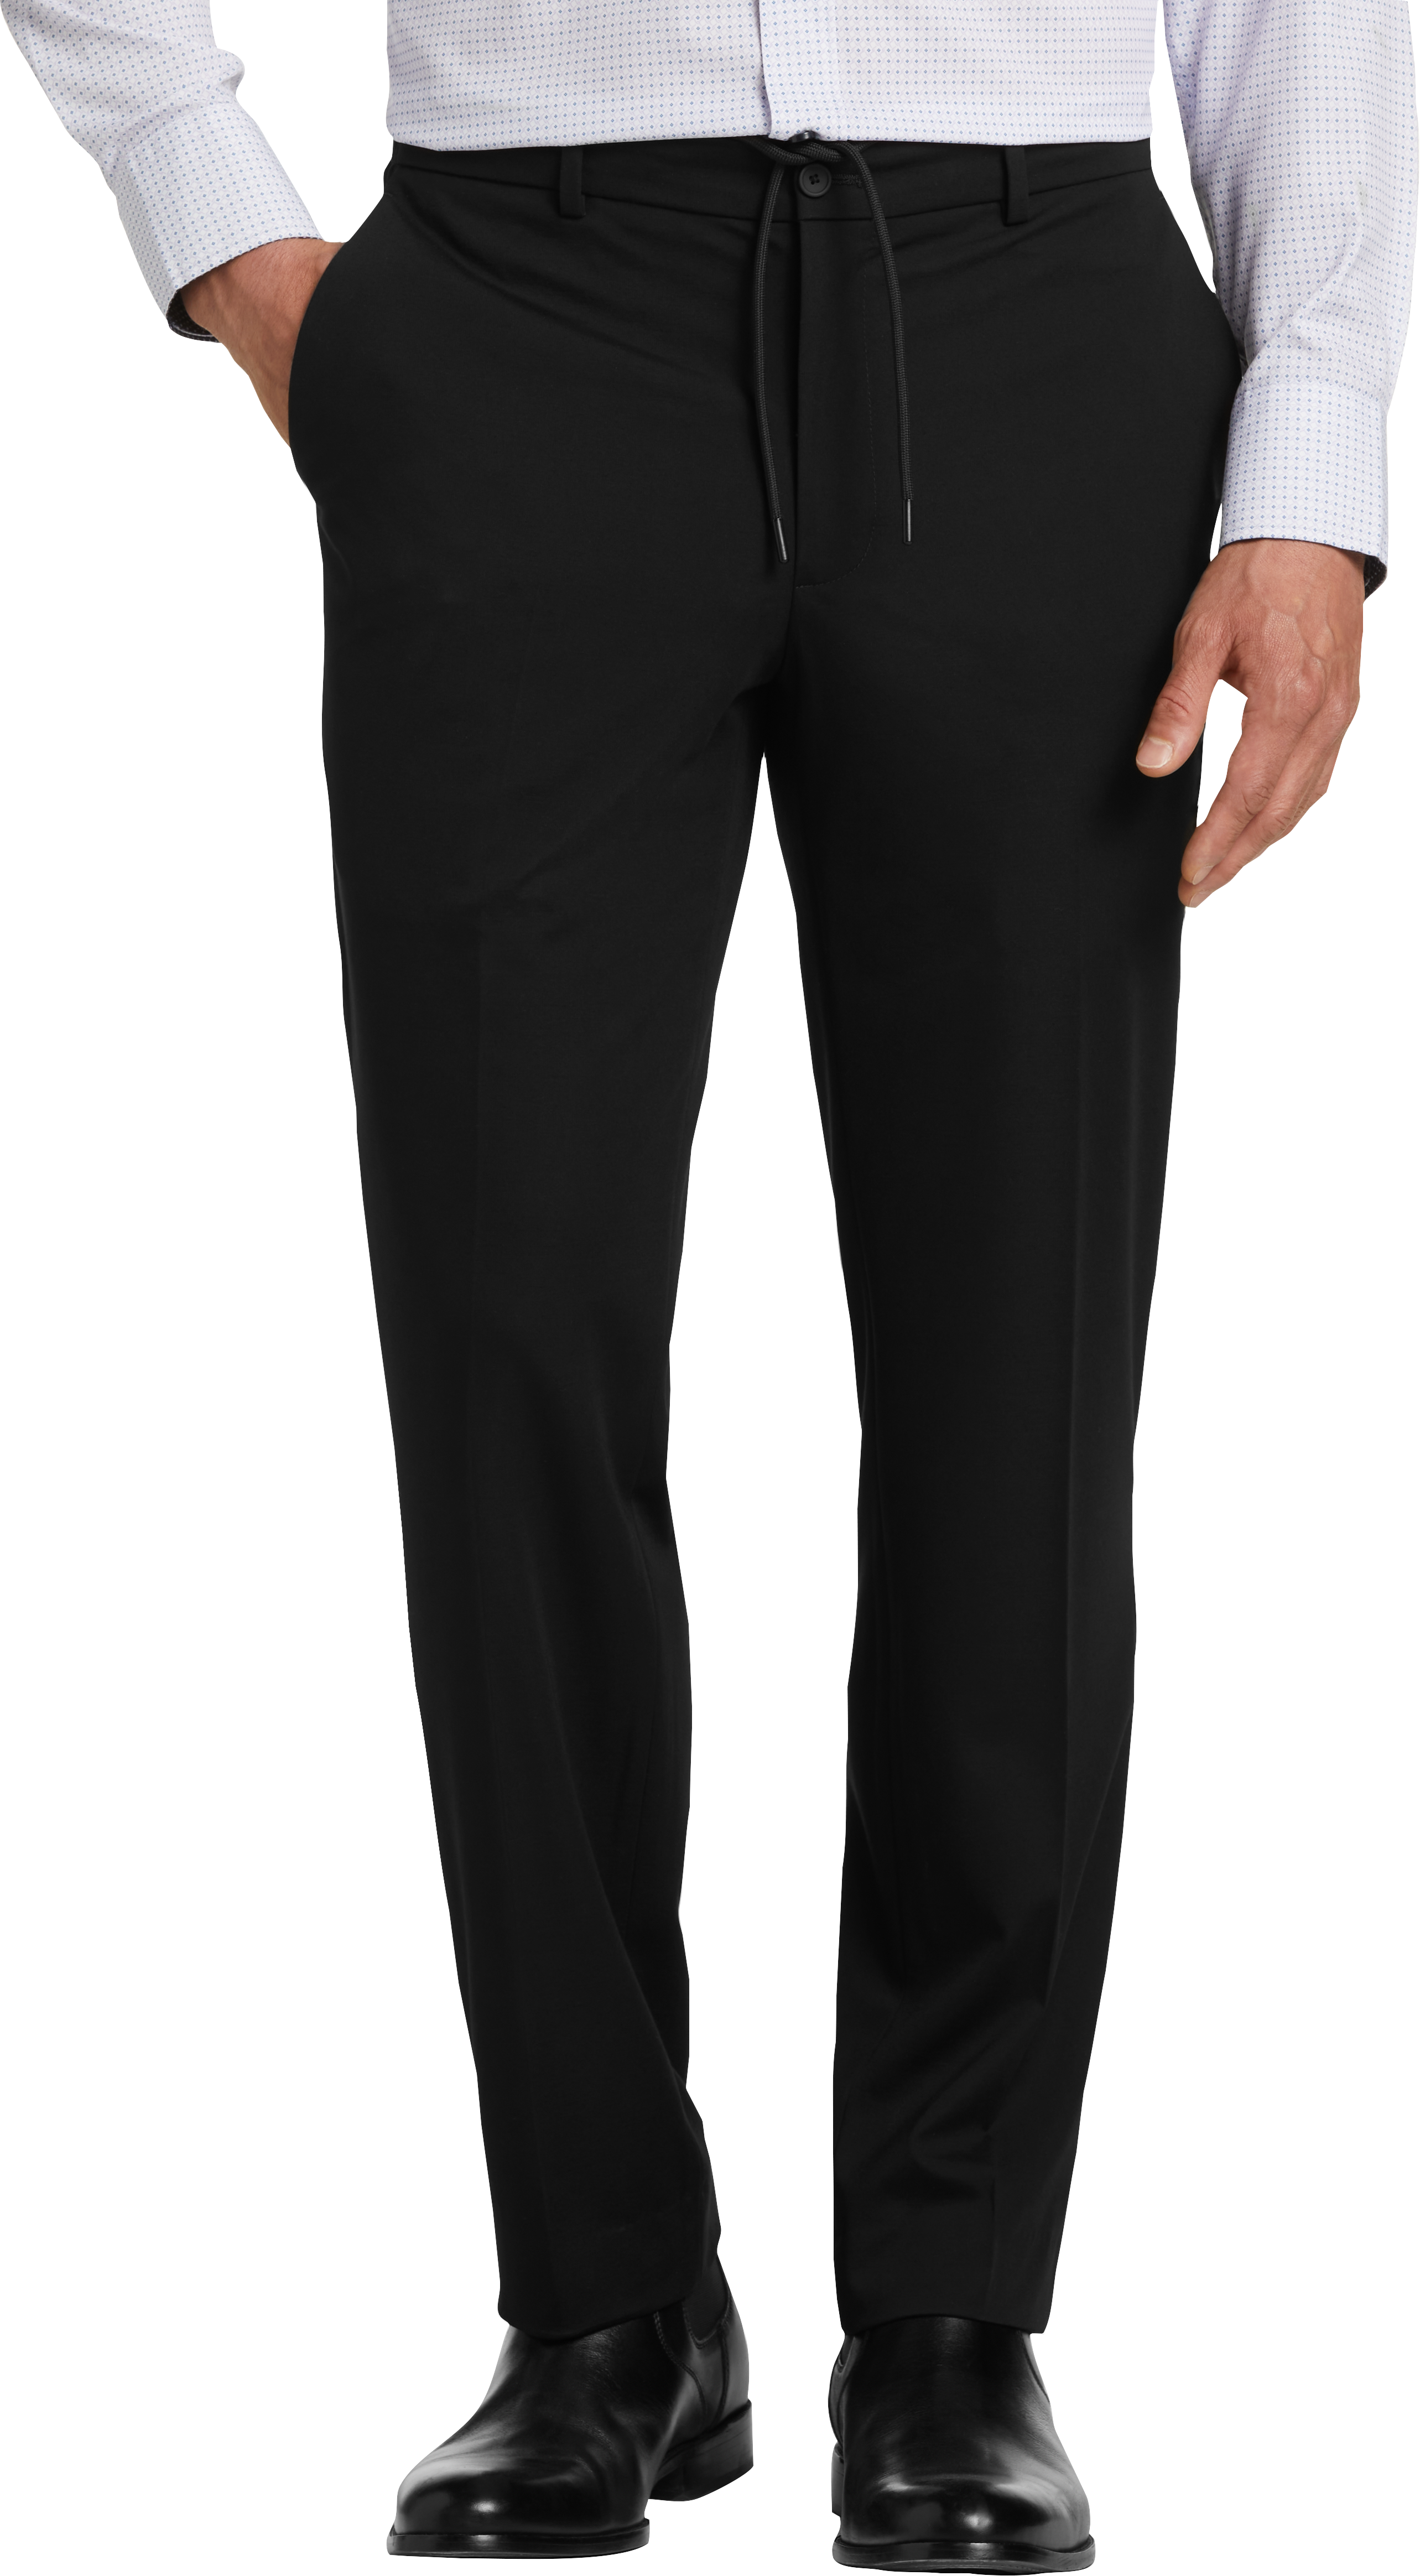 Mens Pants & Shorts, Big & Tall - Awearness Kenneth Cole Knit Slim Fit Suit Separates Pants, Black - Men's Wearhouse